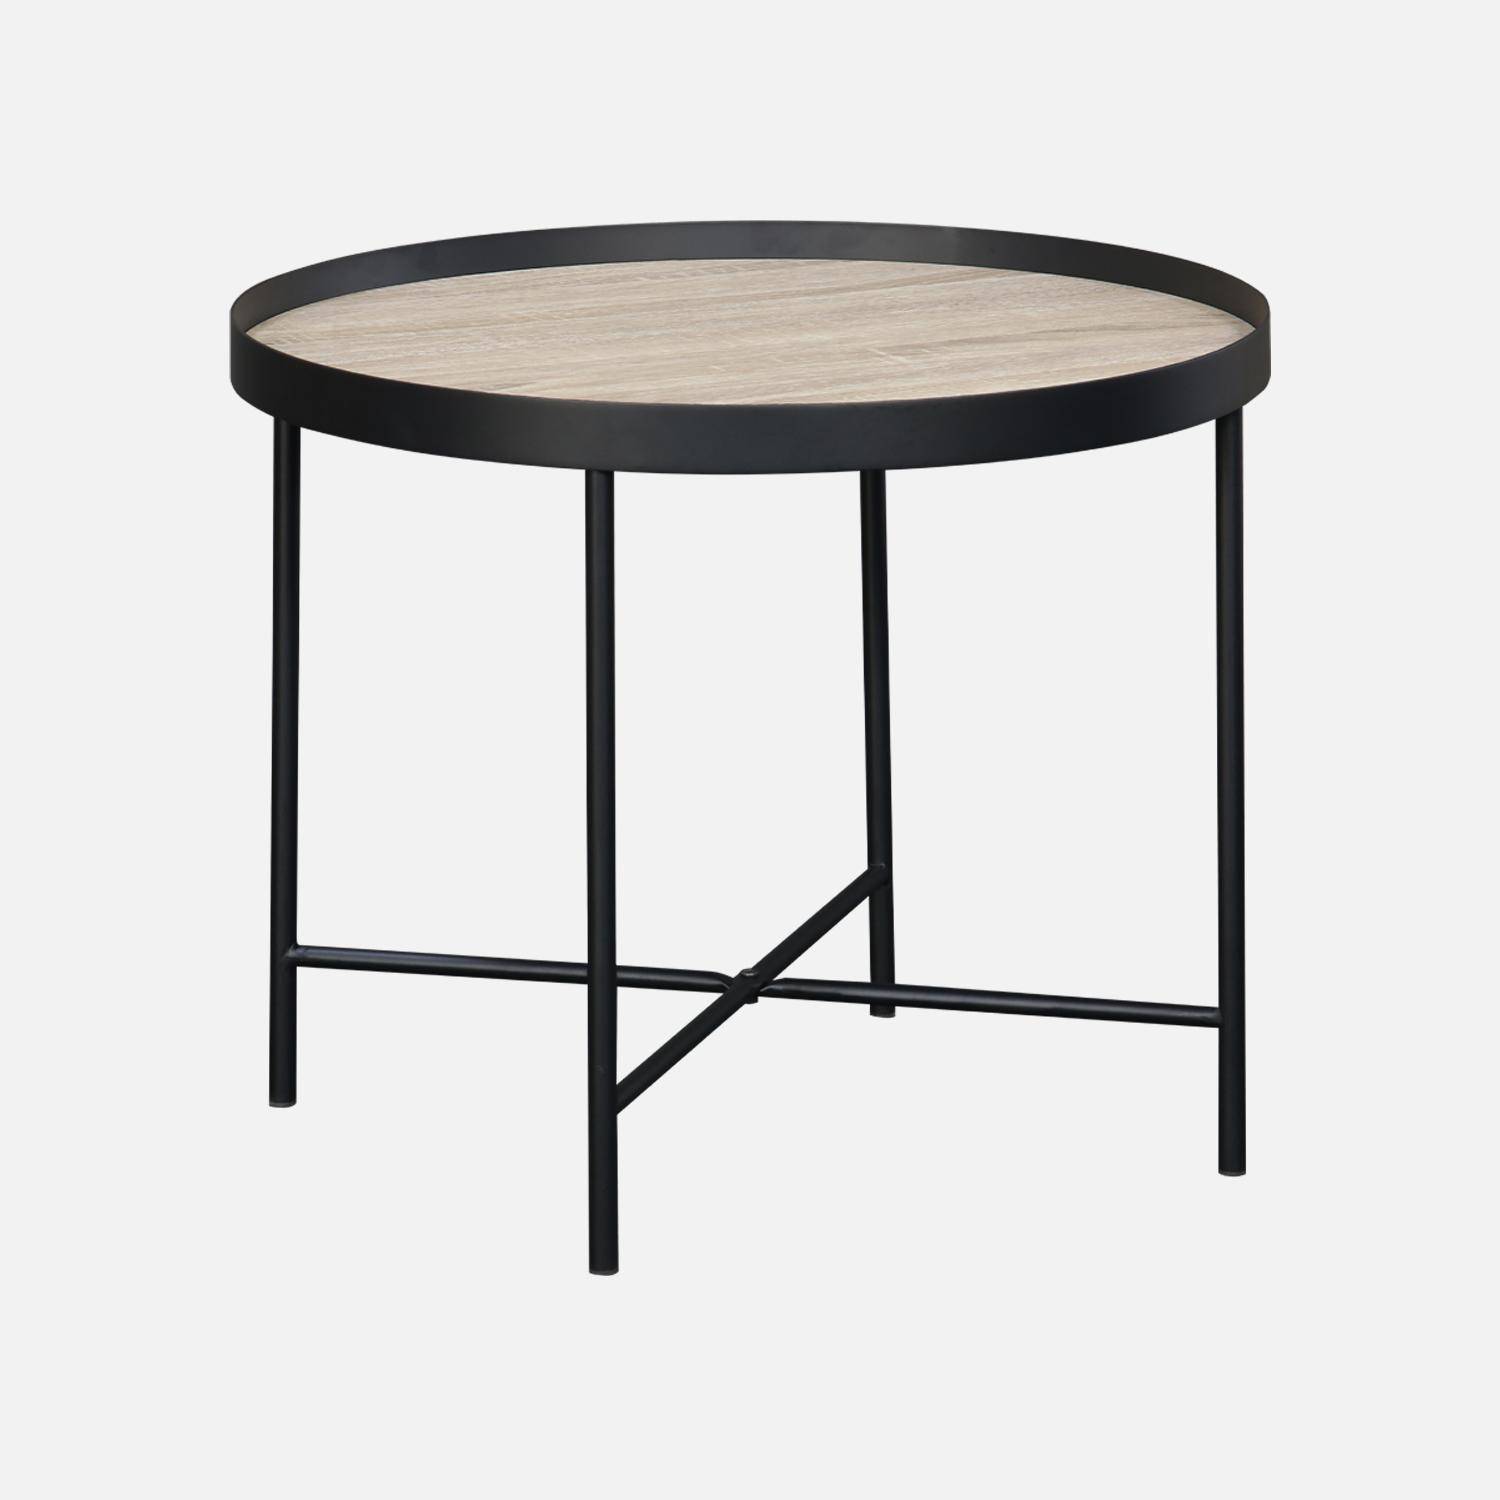 Set of 2 practical round nesting tables in oak-effect MDF with black legs Photo4